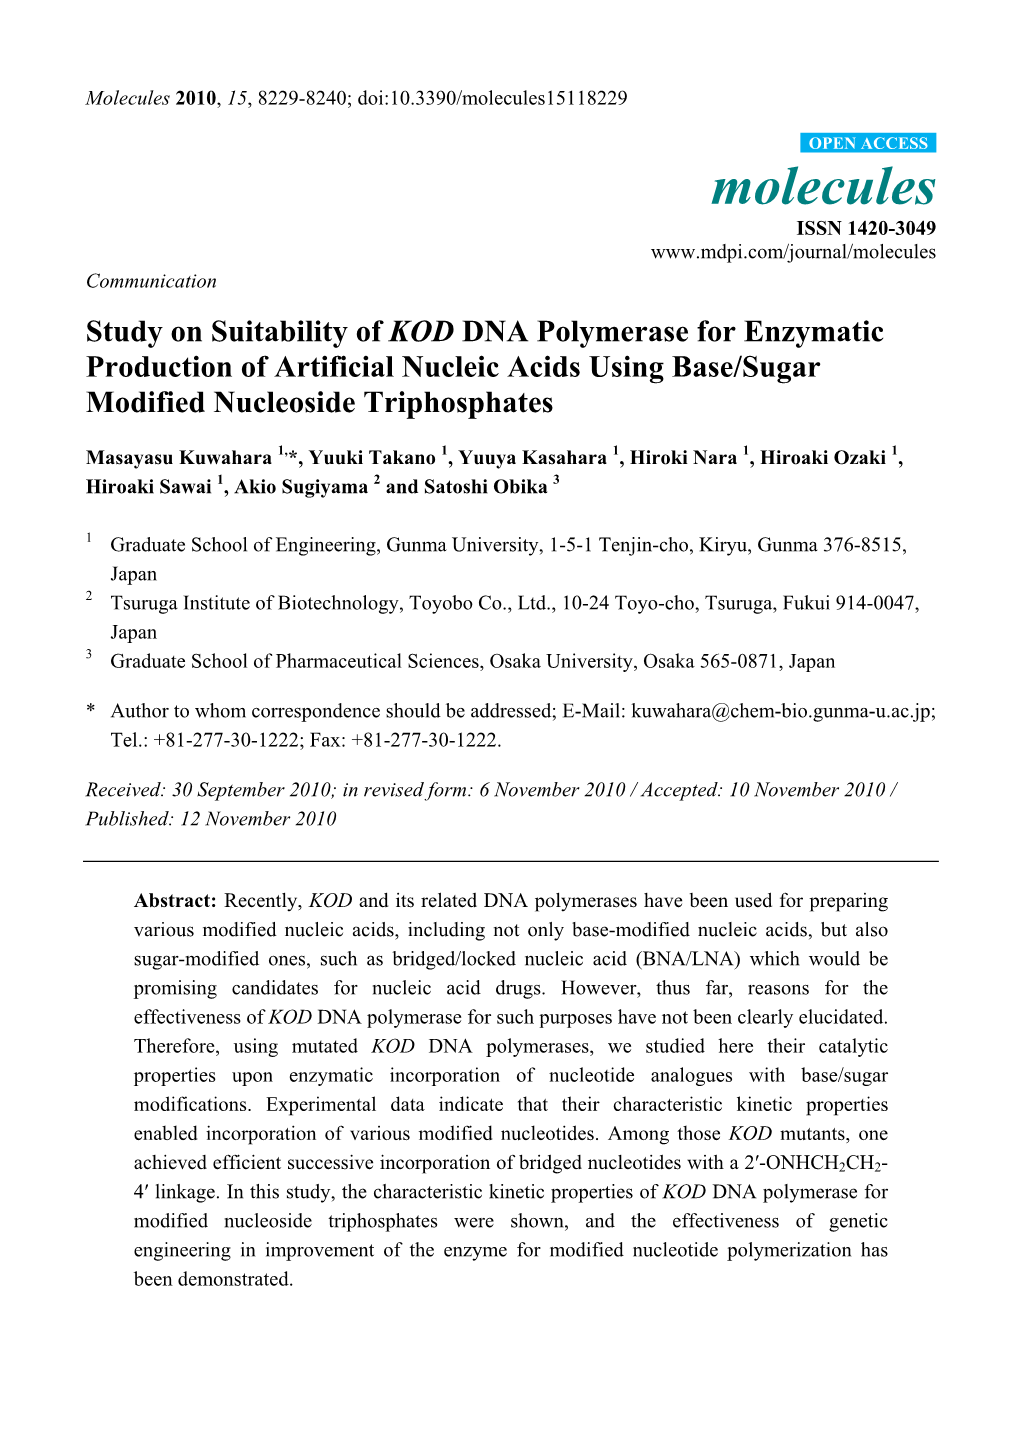 Study on Suitability of KOD DNA Polymerase for Enzymatic Production of Artificial Nucleic Acids Using Base/Sugar Modified Nucleoside Triphosphates